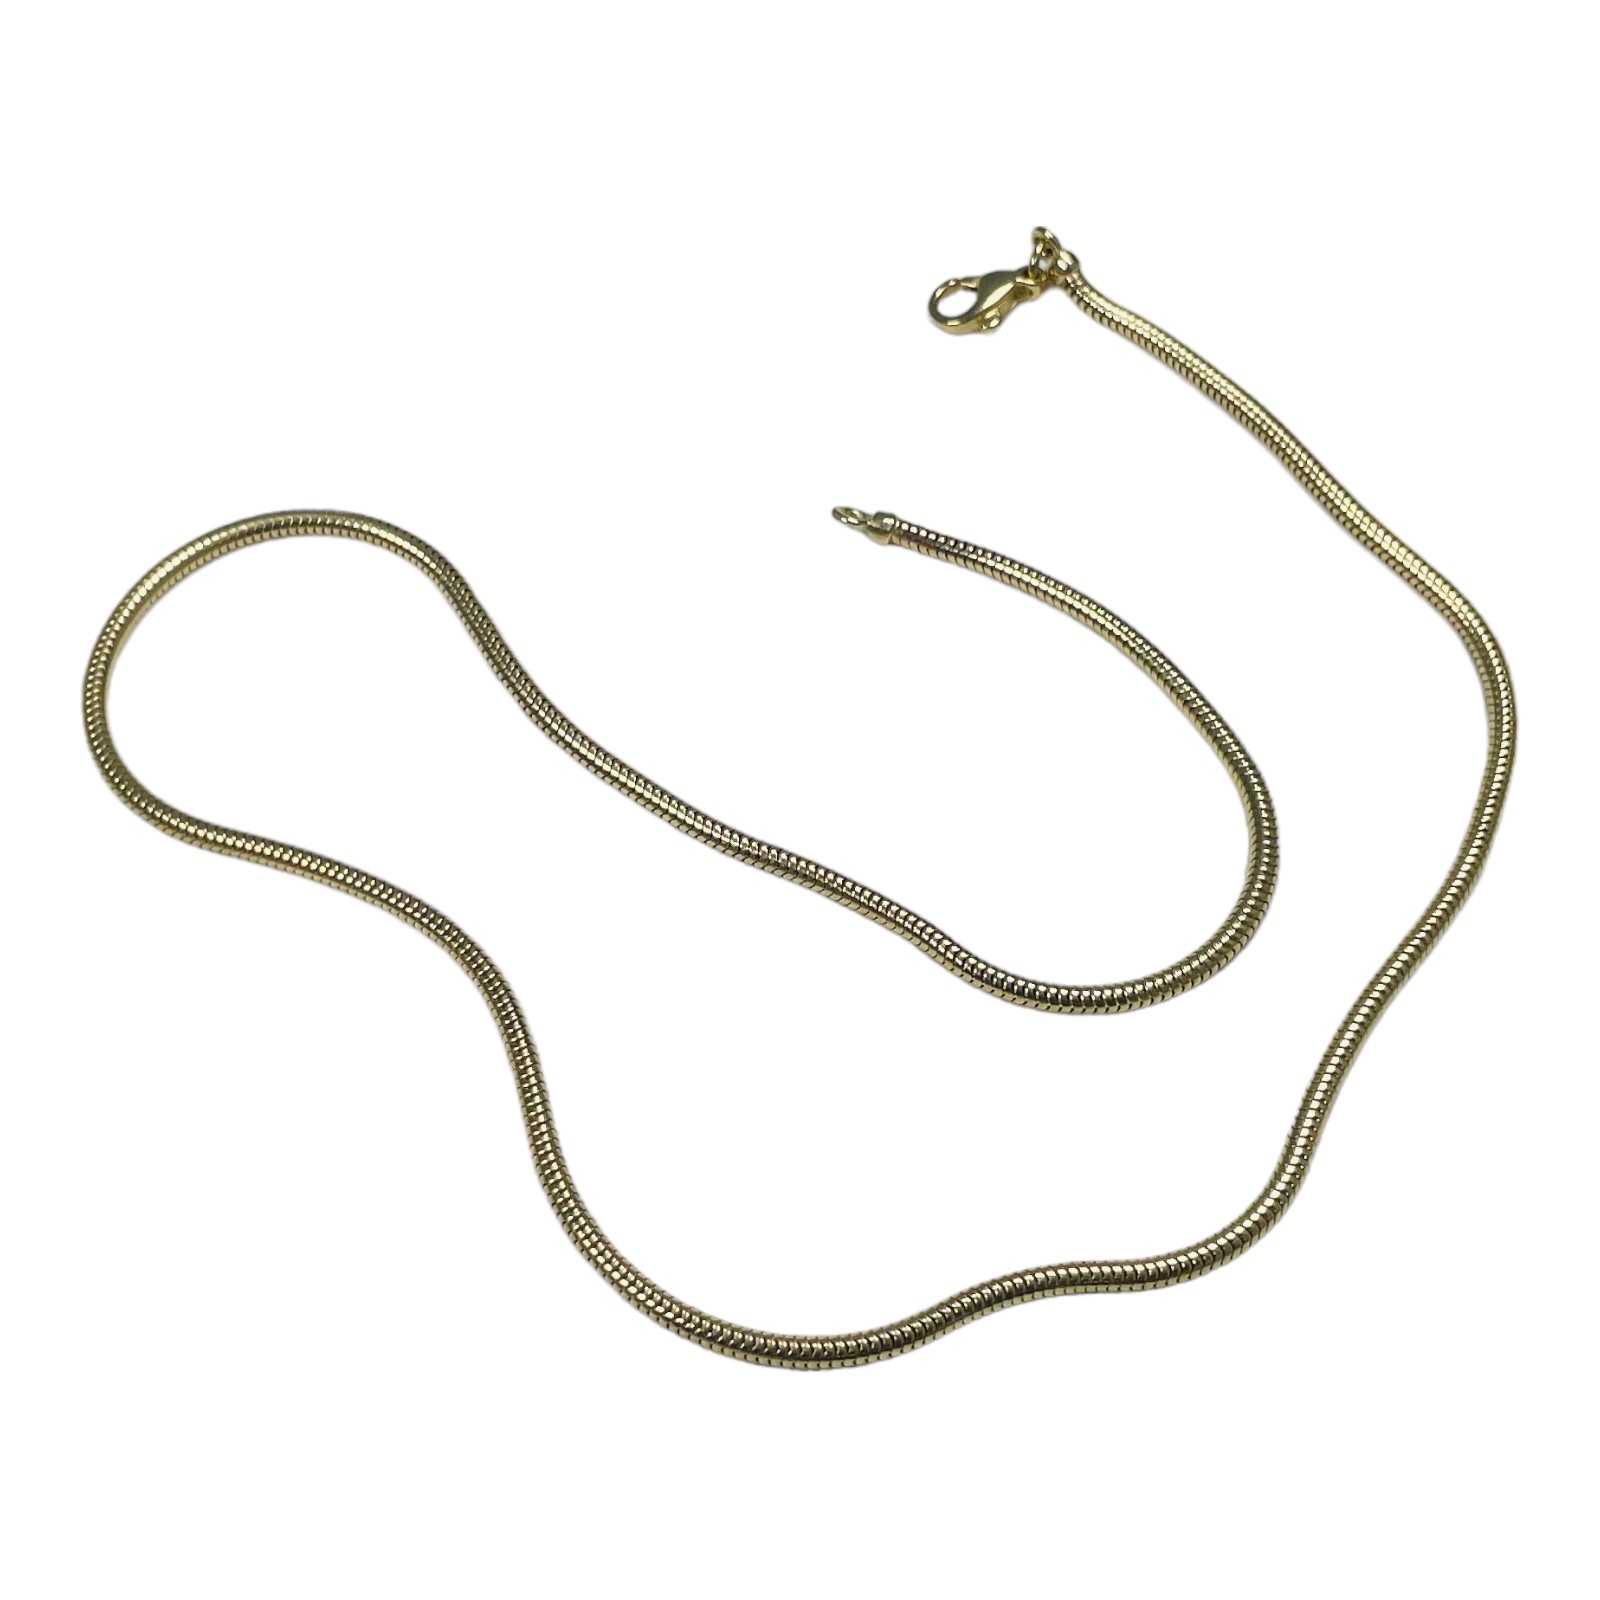 A 9ct yellow gold snake link chain, 18 inches in length, weighs 12.9 grams, Birmingham hallmarks. - Image 2 of 6